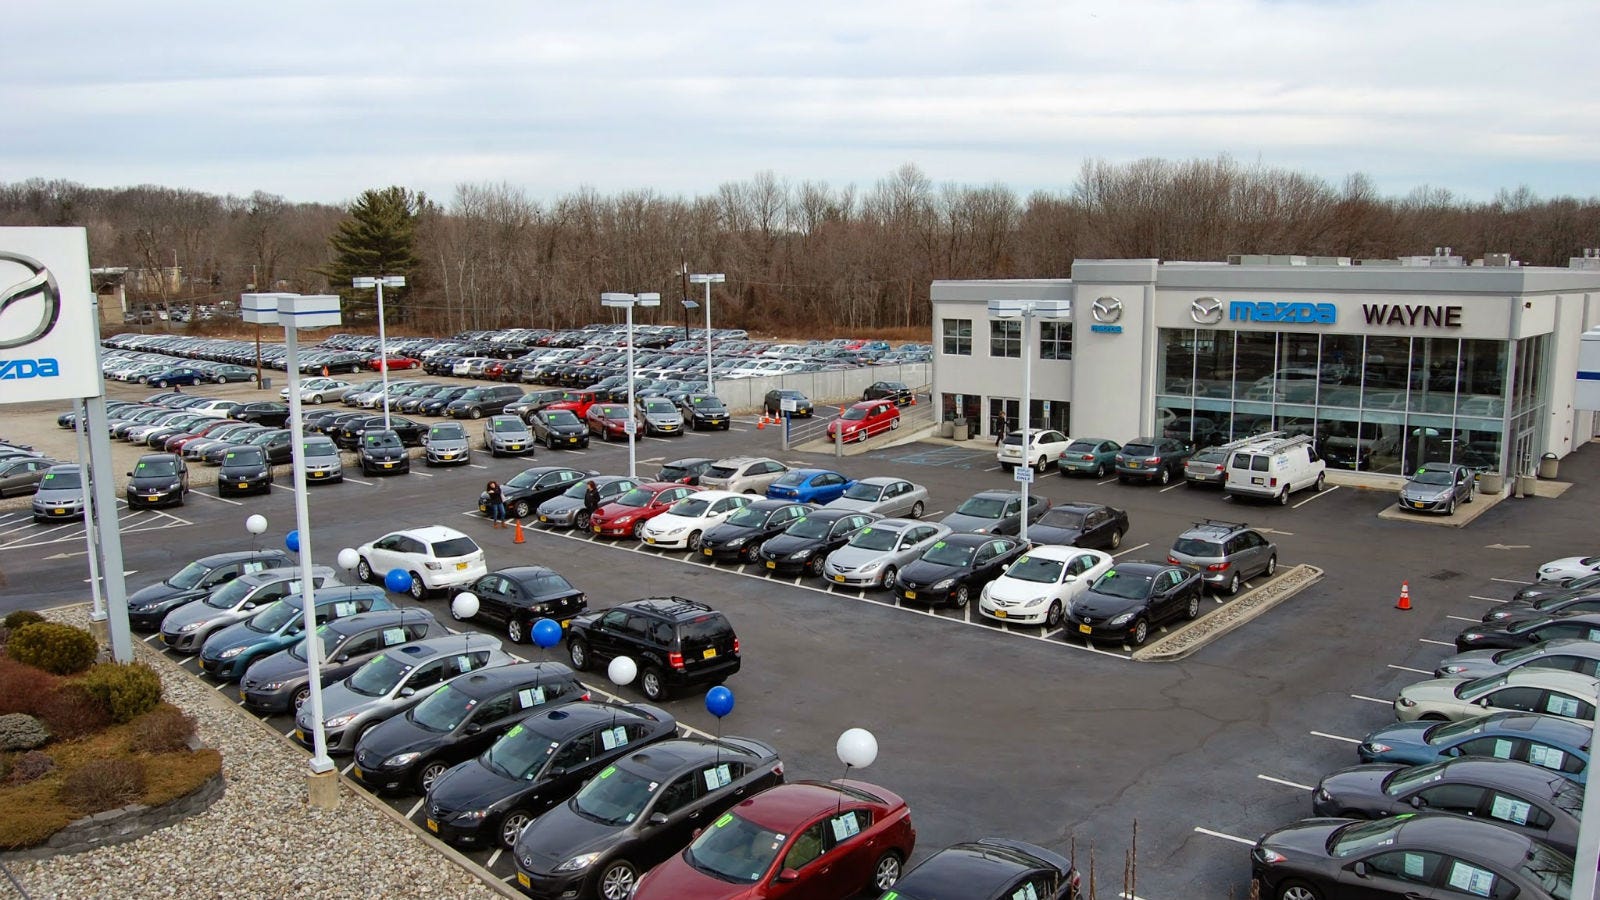 Investigation Says New Jersey Dealership Sold Rental Cars As "New"